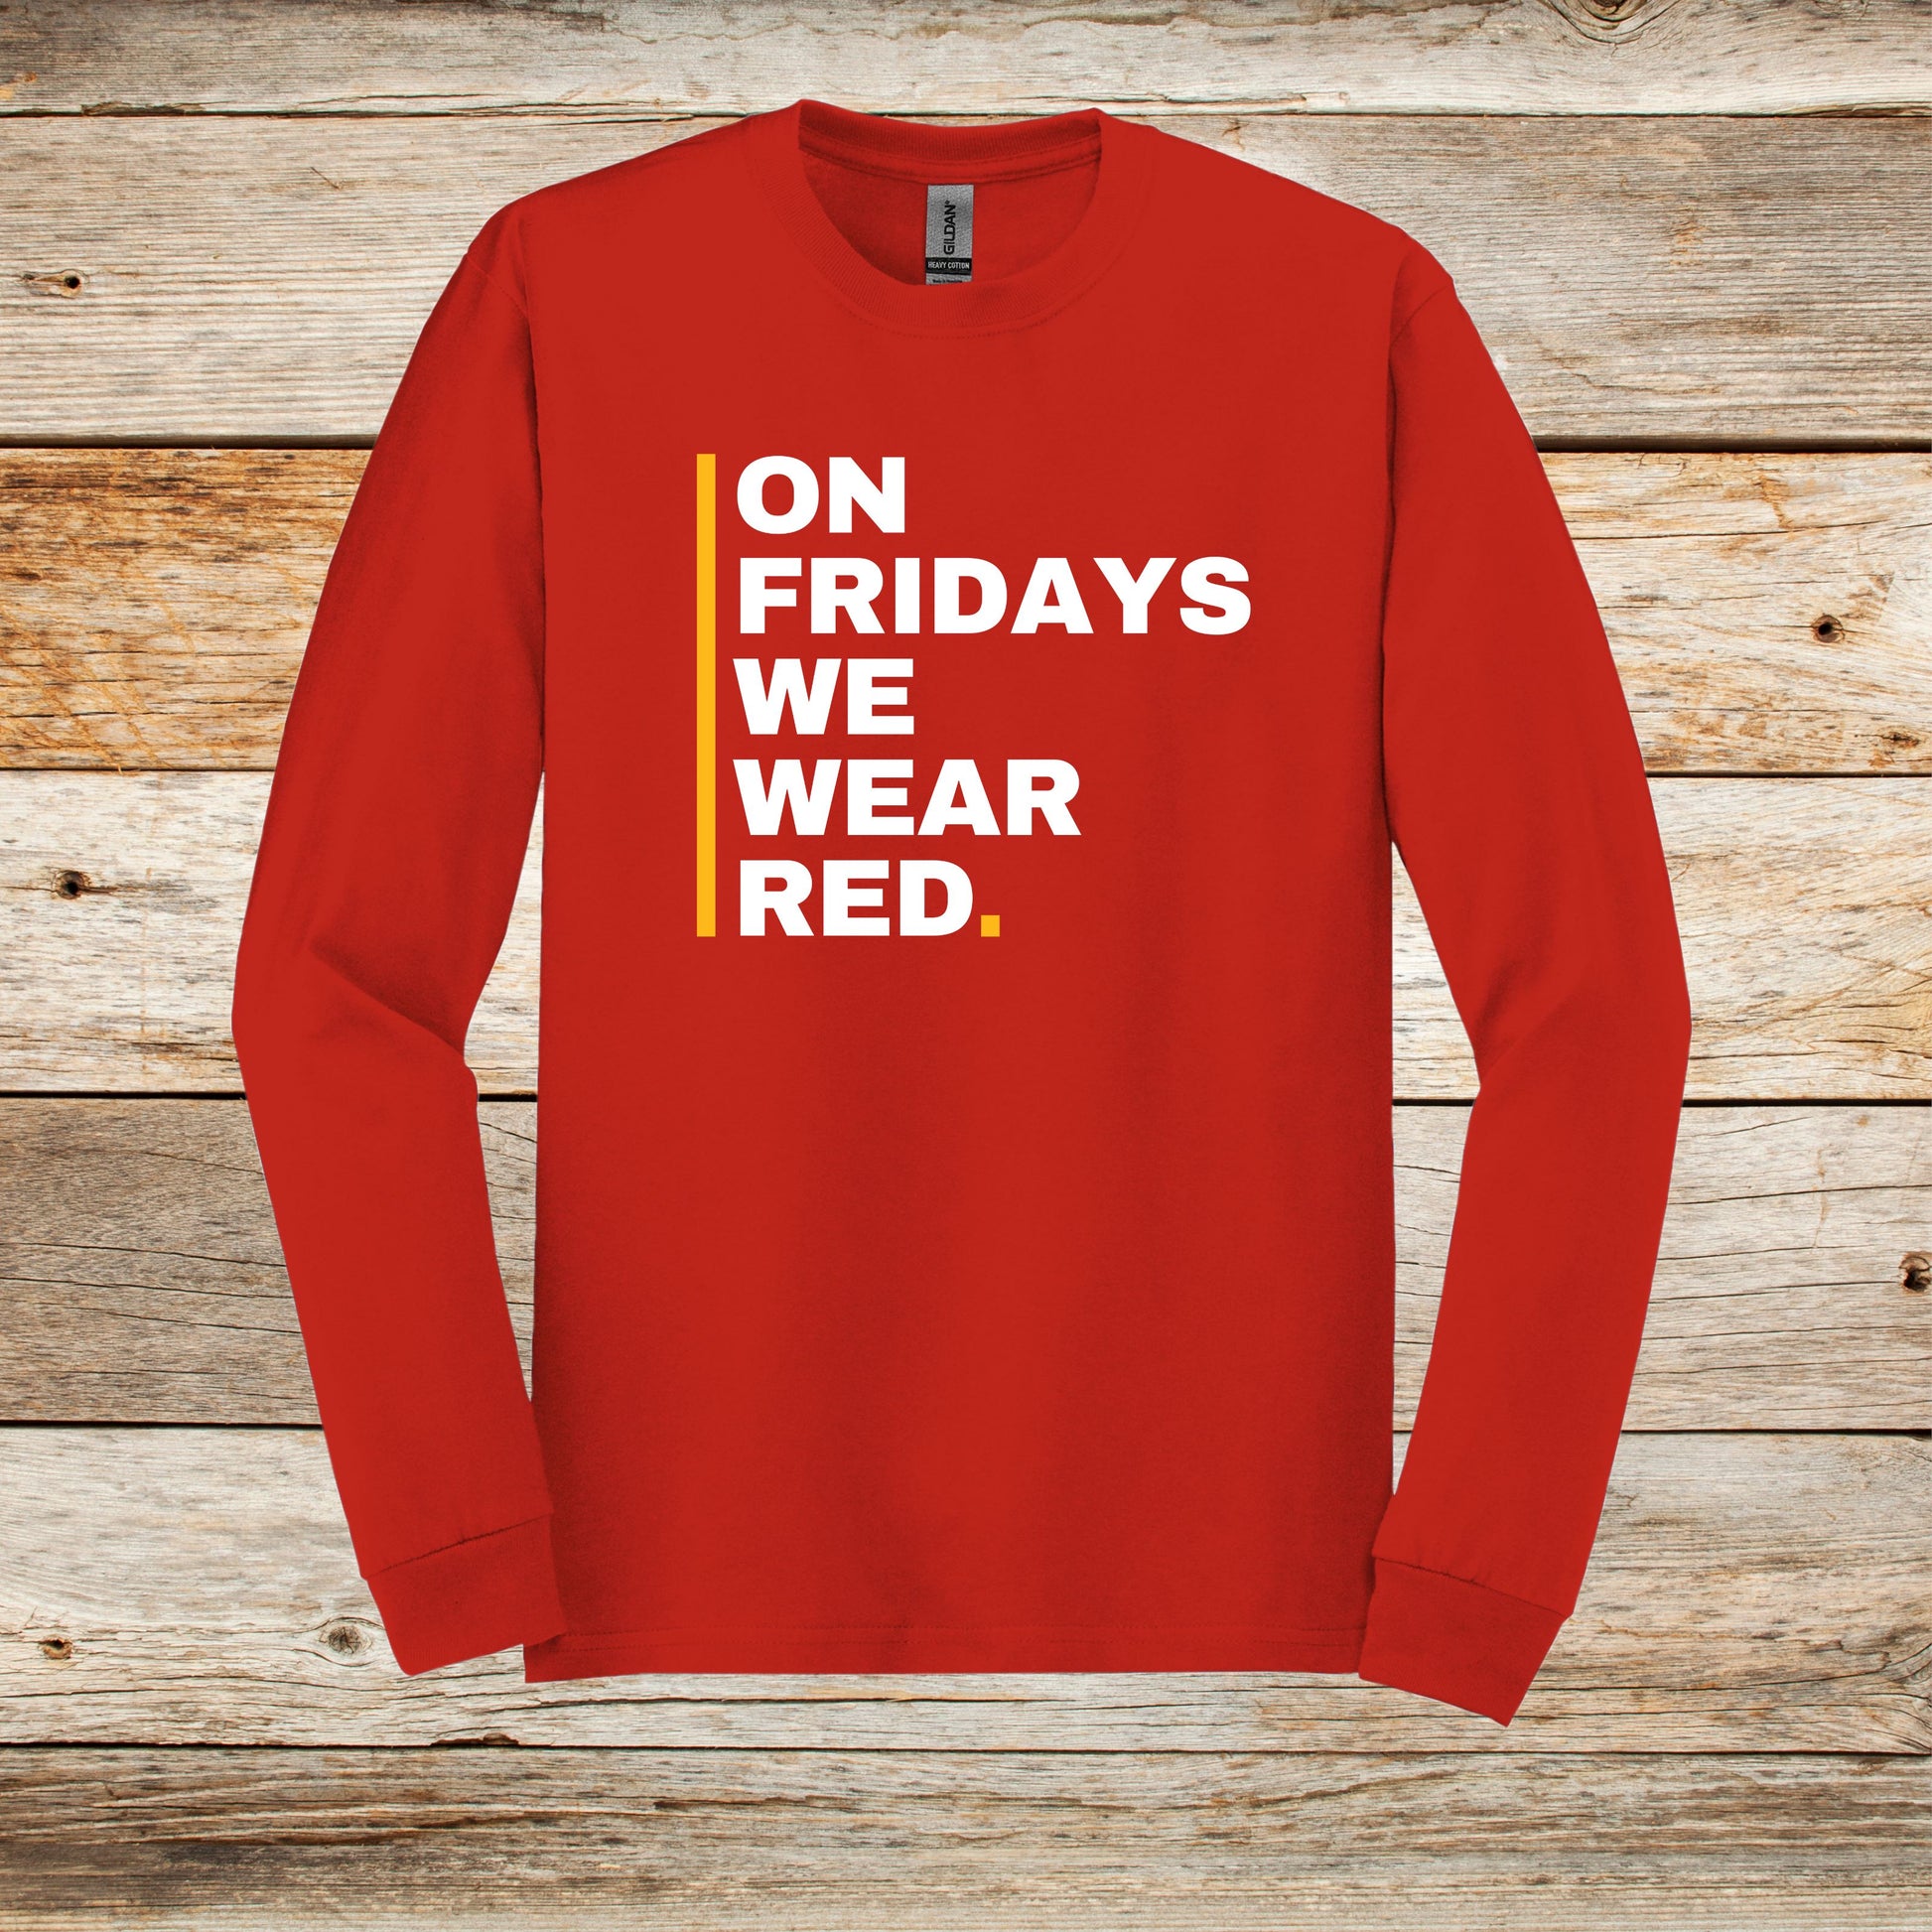 Football Long Sleeve T-Shirt - Chiefs Football - We Wear Red - Adult and Children's Tee Shirts - Sports Long Sleeve T-Shirts Graphic Avenue Red Adult Small 